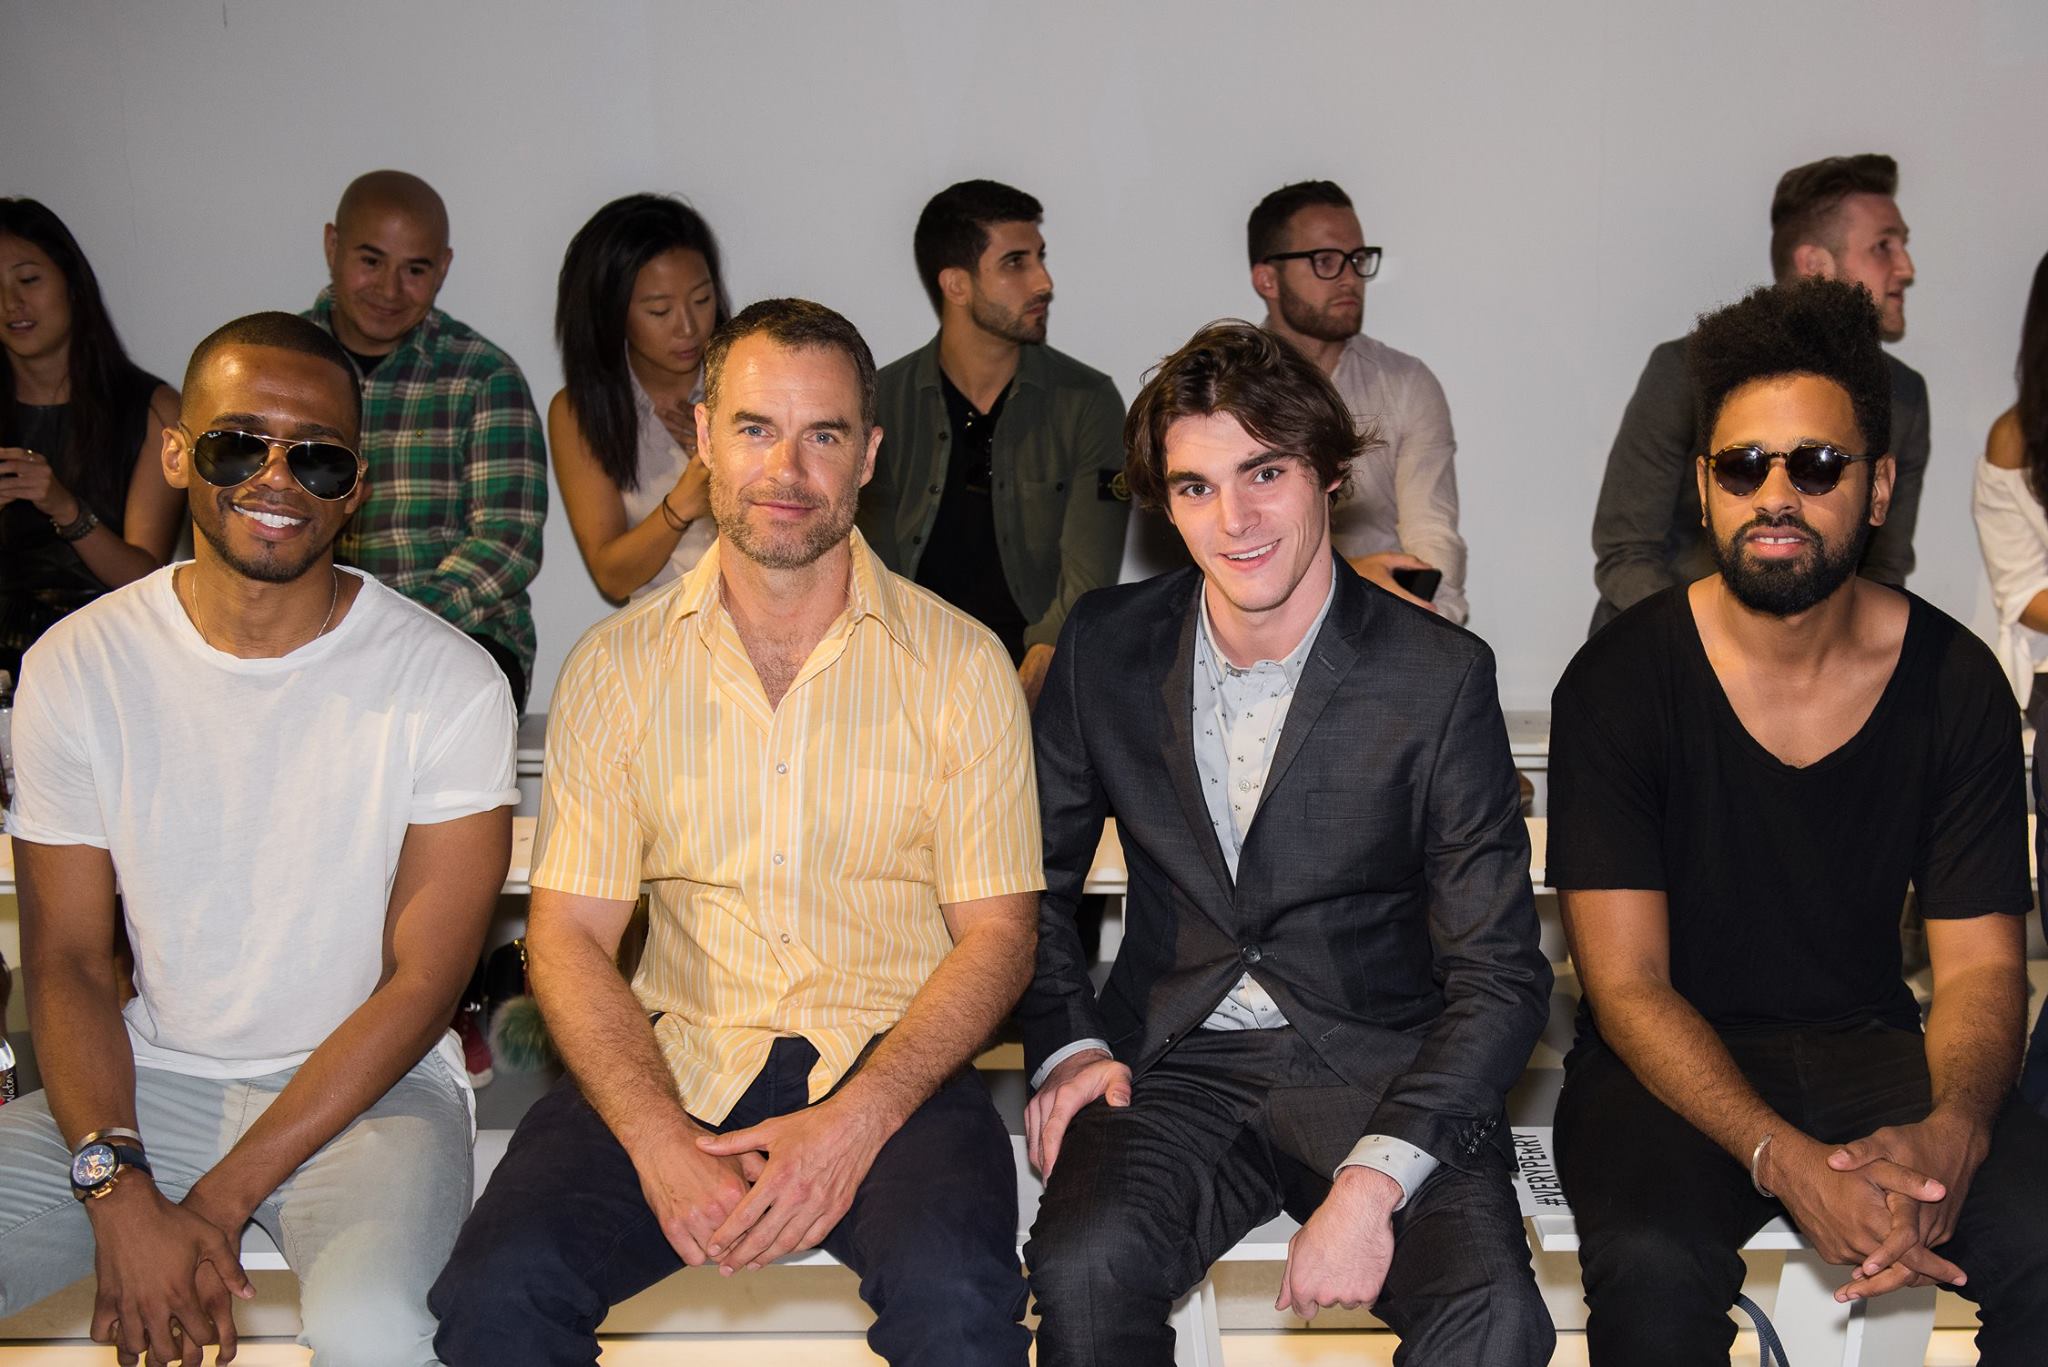 Actors Eric West, Murray Bartlett and RJ Mitte sit front row at Perry Ellis during New York Fashion Week: Men's S/S 2016 at Skylight Clarkson Sq on July 16, 2015 in New York City.